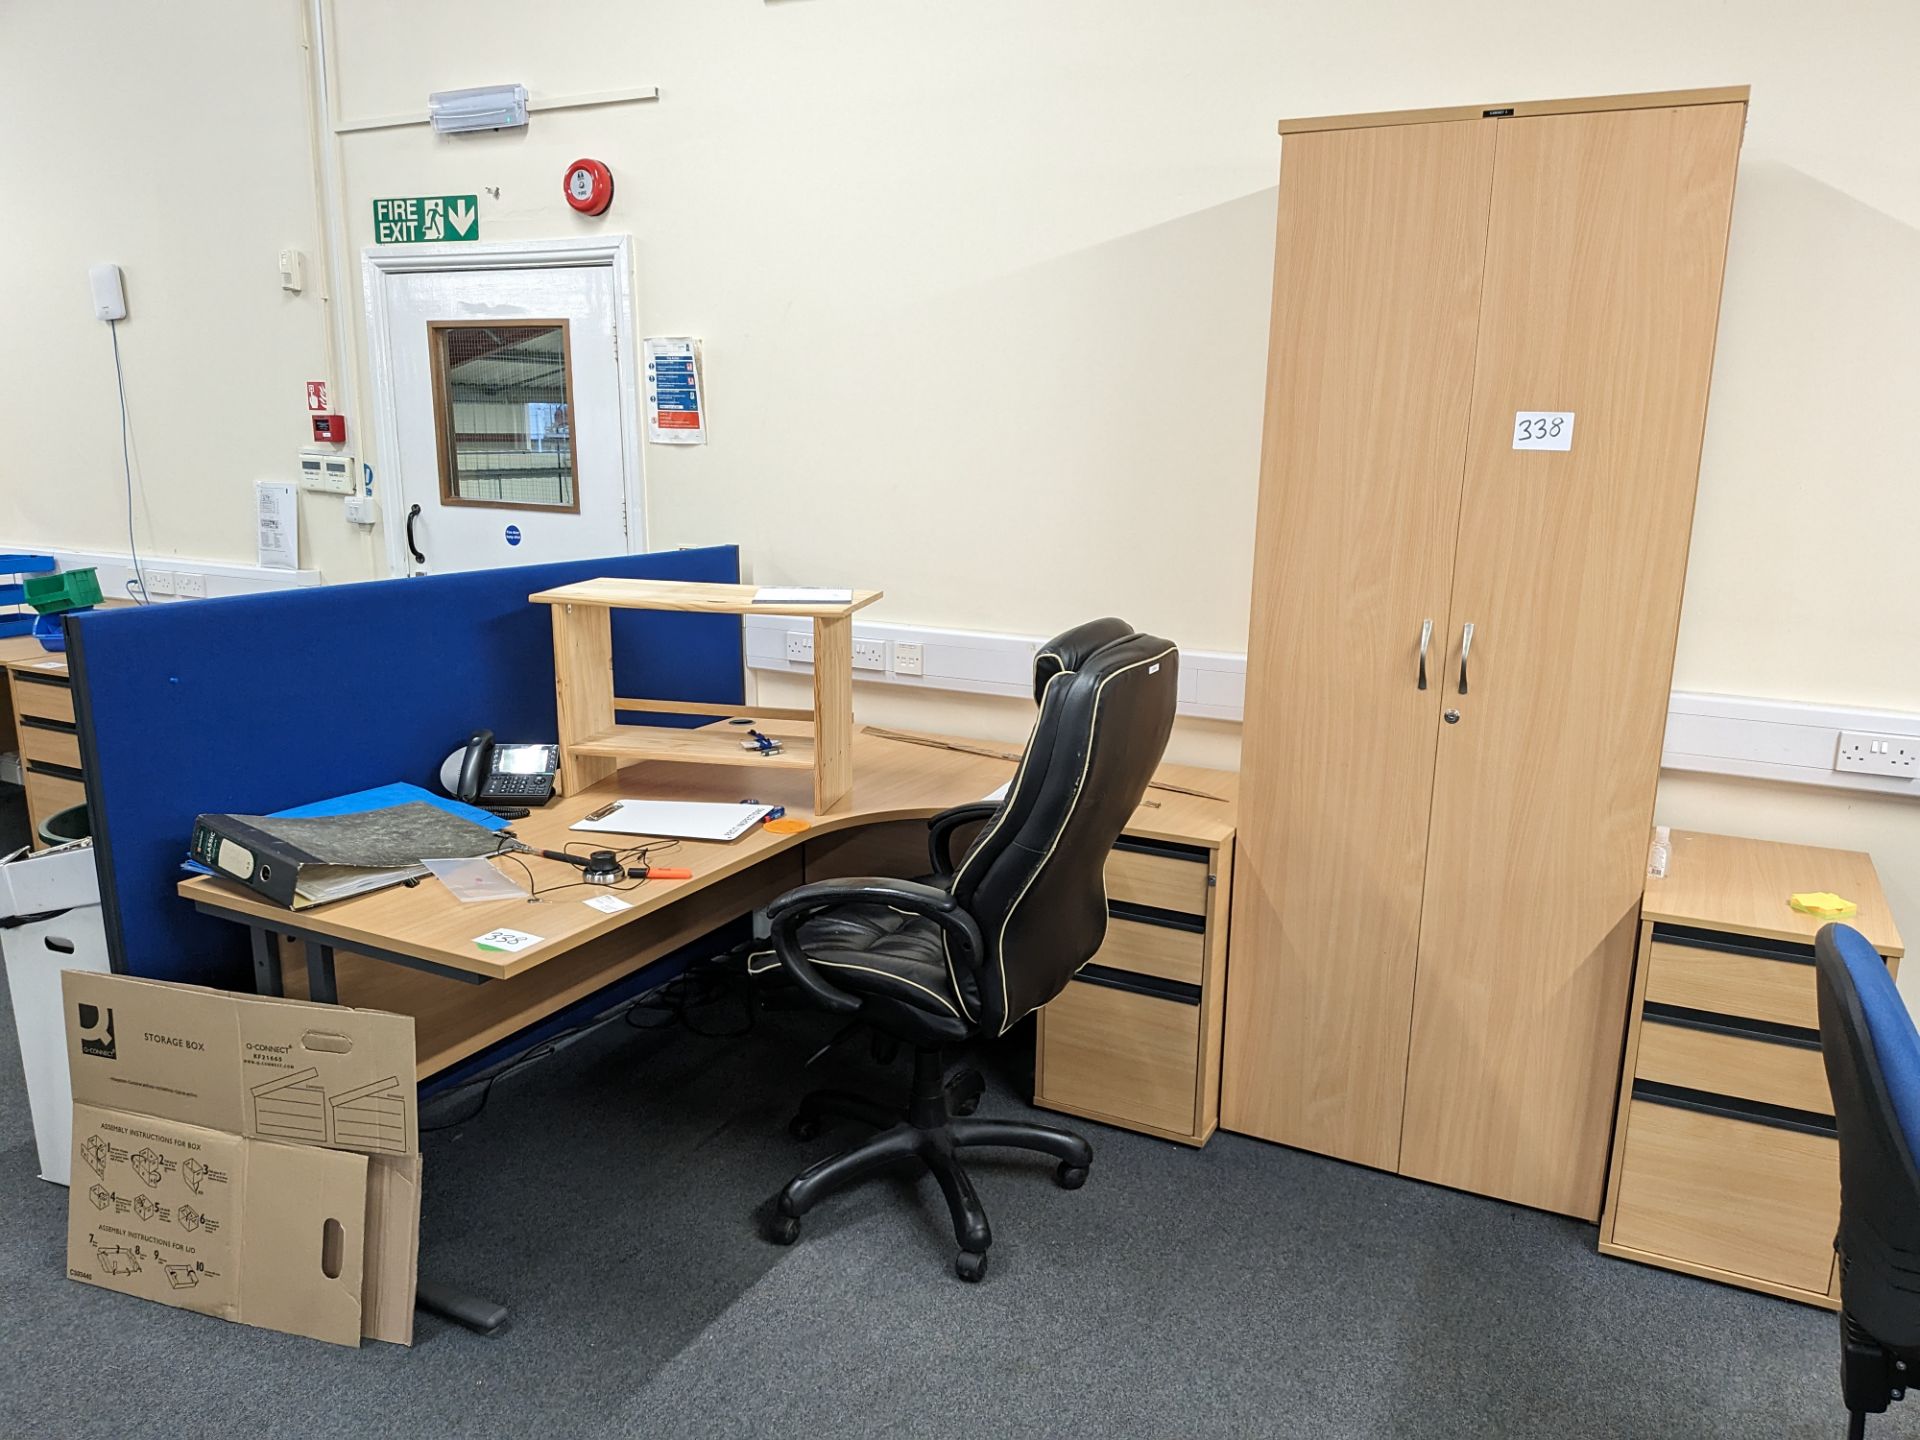 1: desk, 2: pedestal units, 1: tambour fronted cupboard (Located on First Floor)